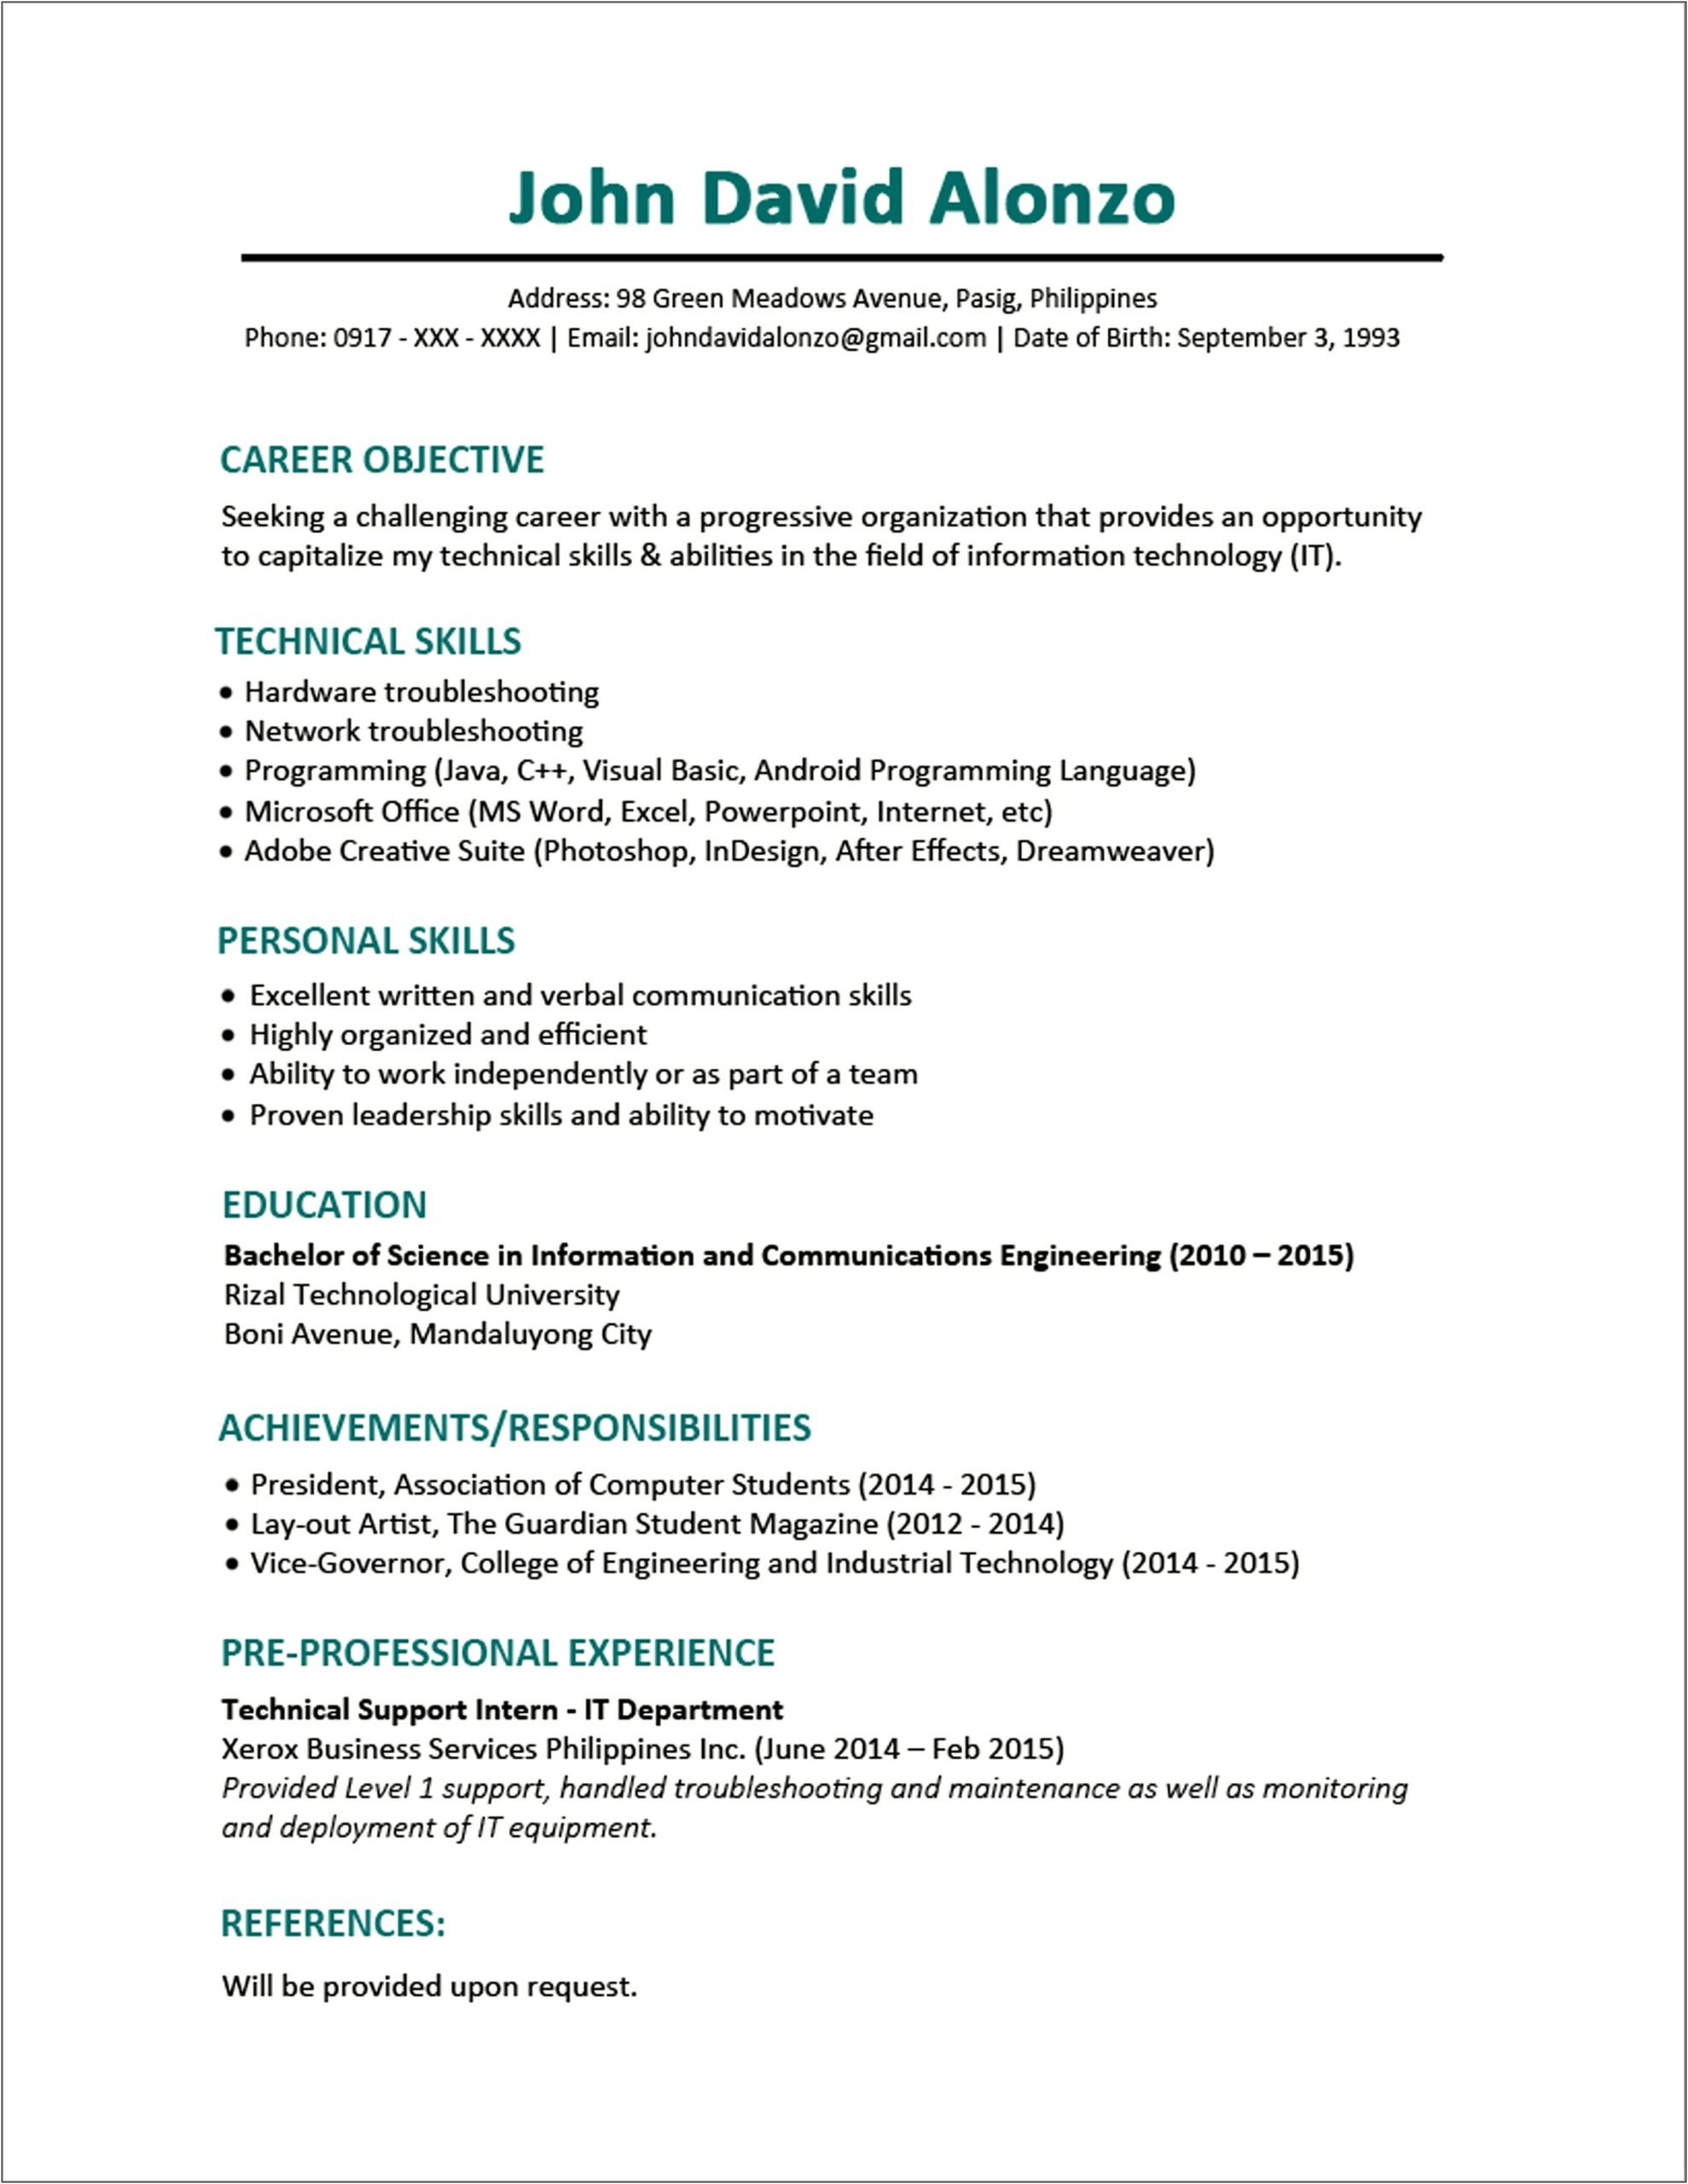 Sample Resume Images With Skills